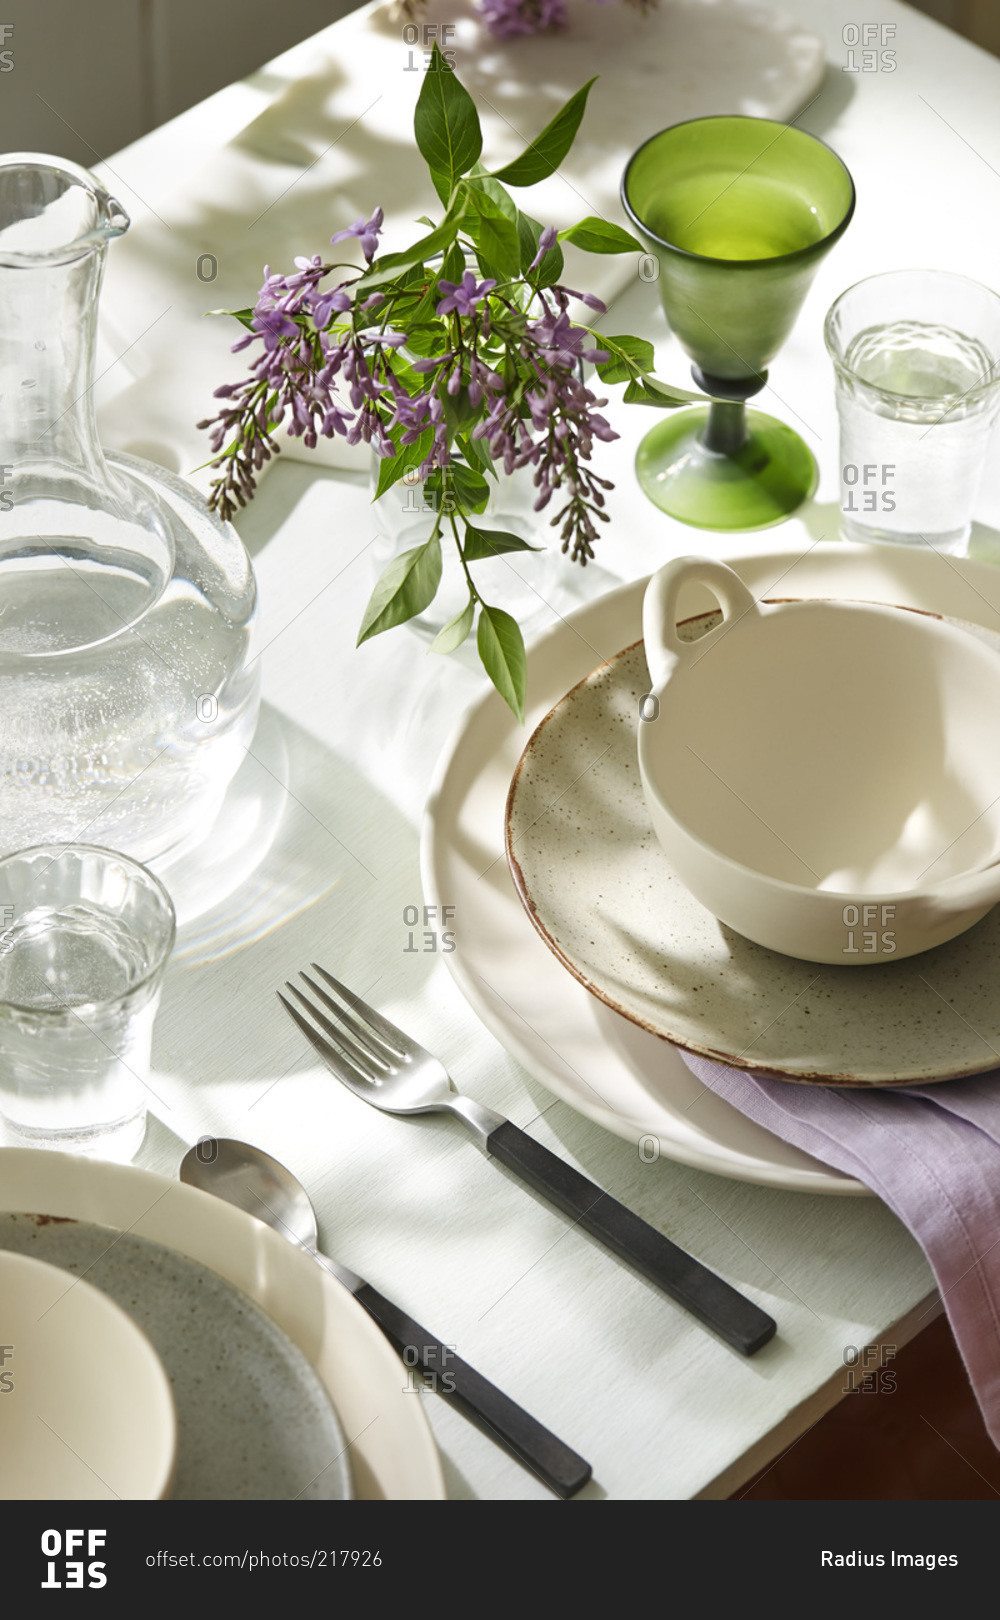 A table setting with purple flowers